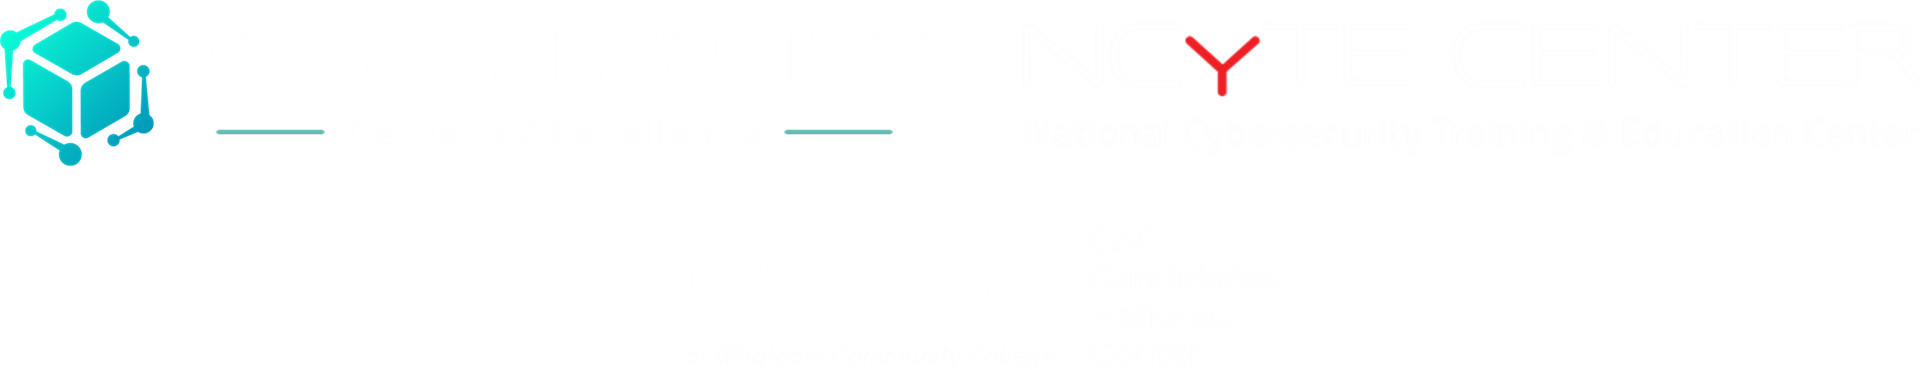 Logos for CCoE, NCyTE, and CCNC